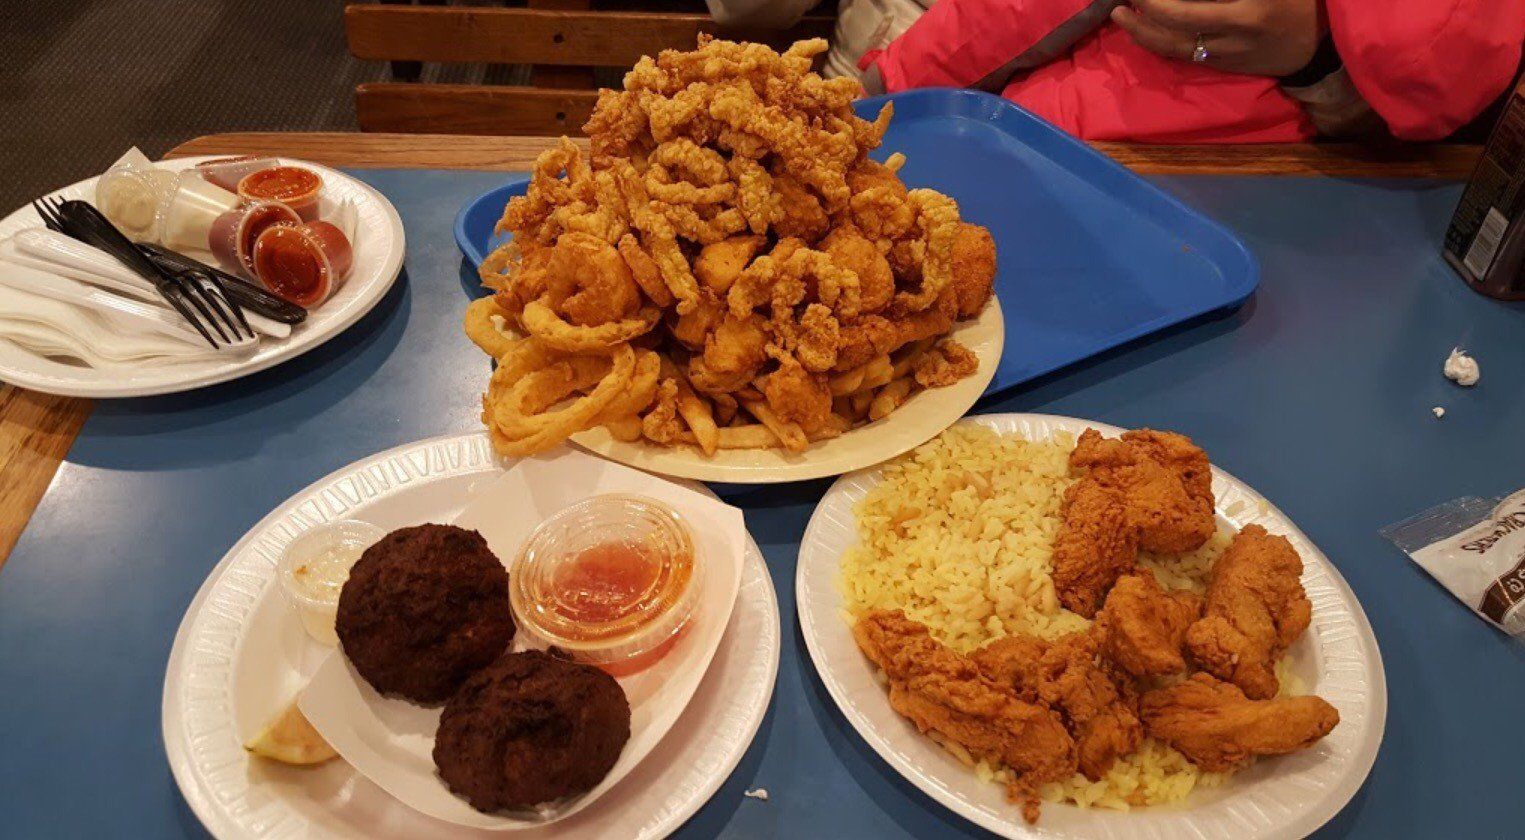 Fried seafood dishes